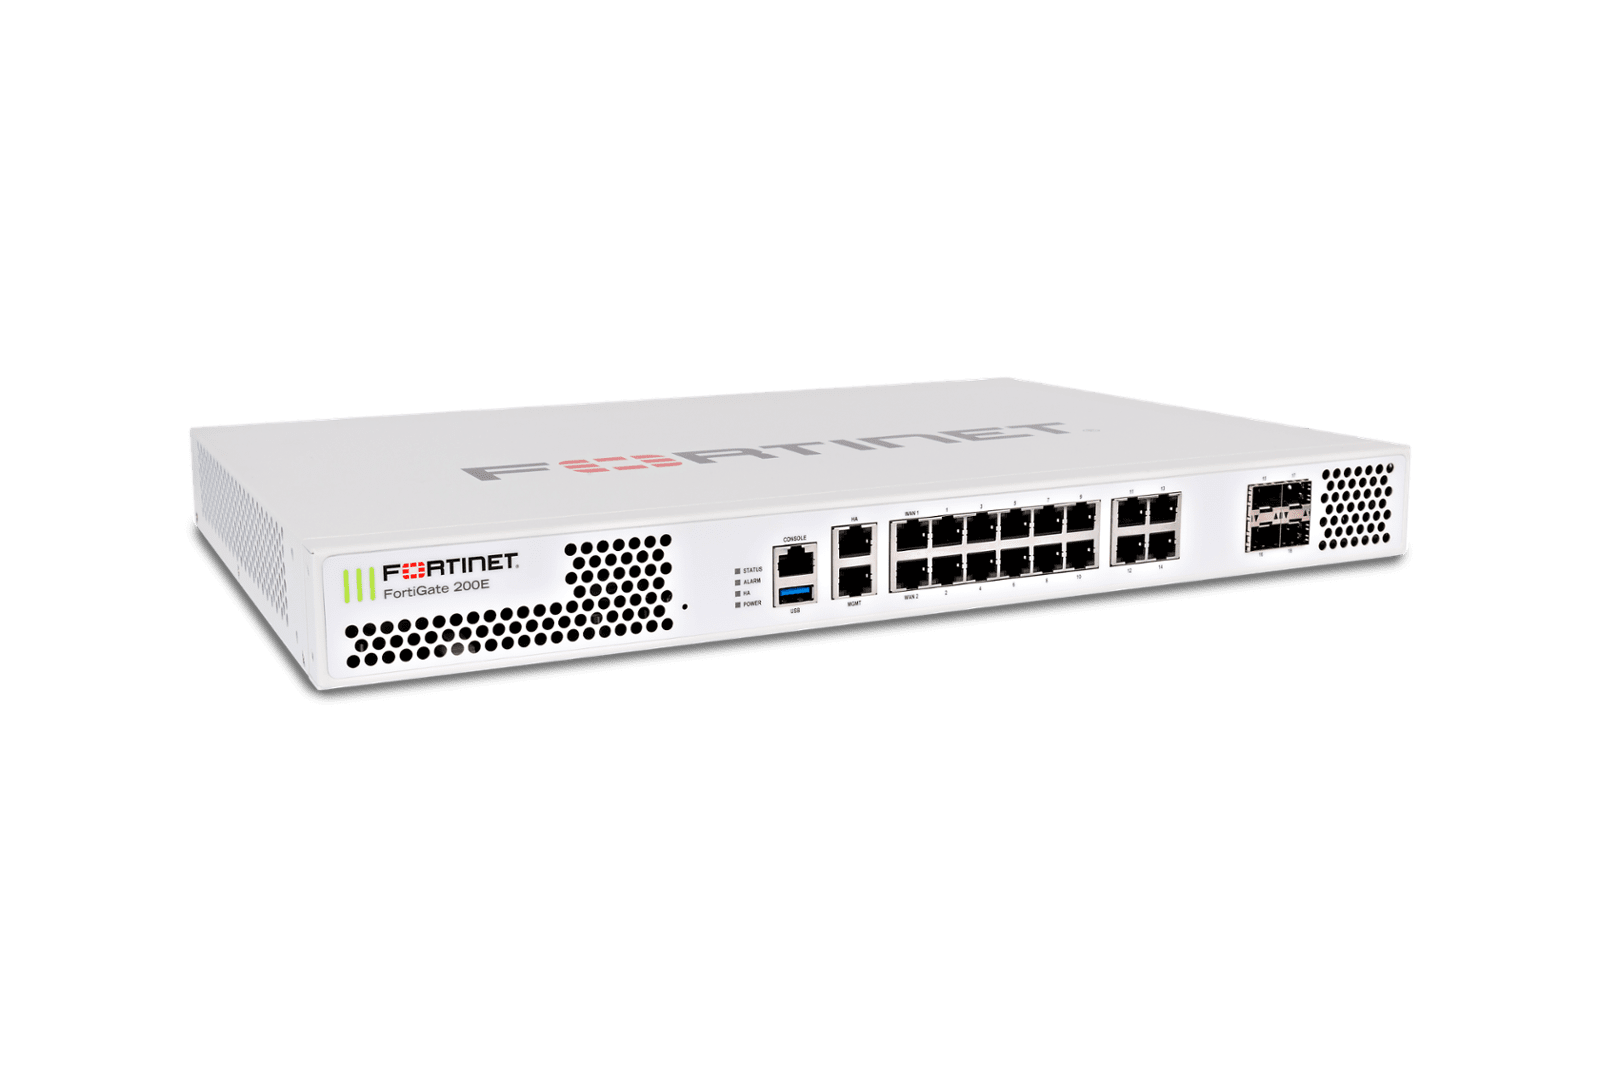 FortiSwitch Network Switch